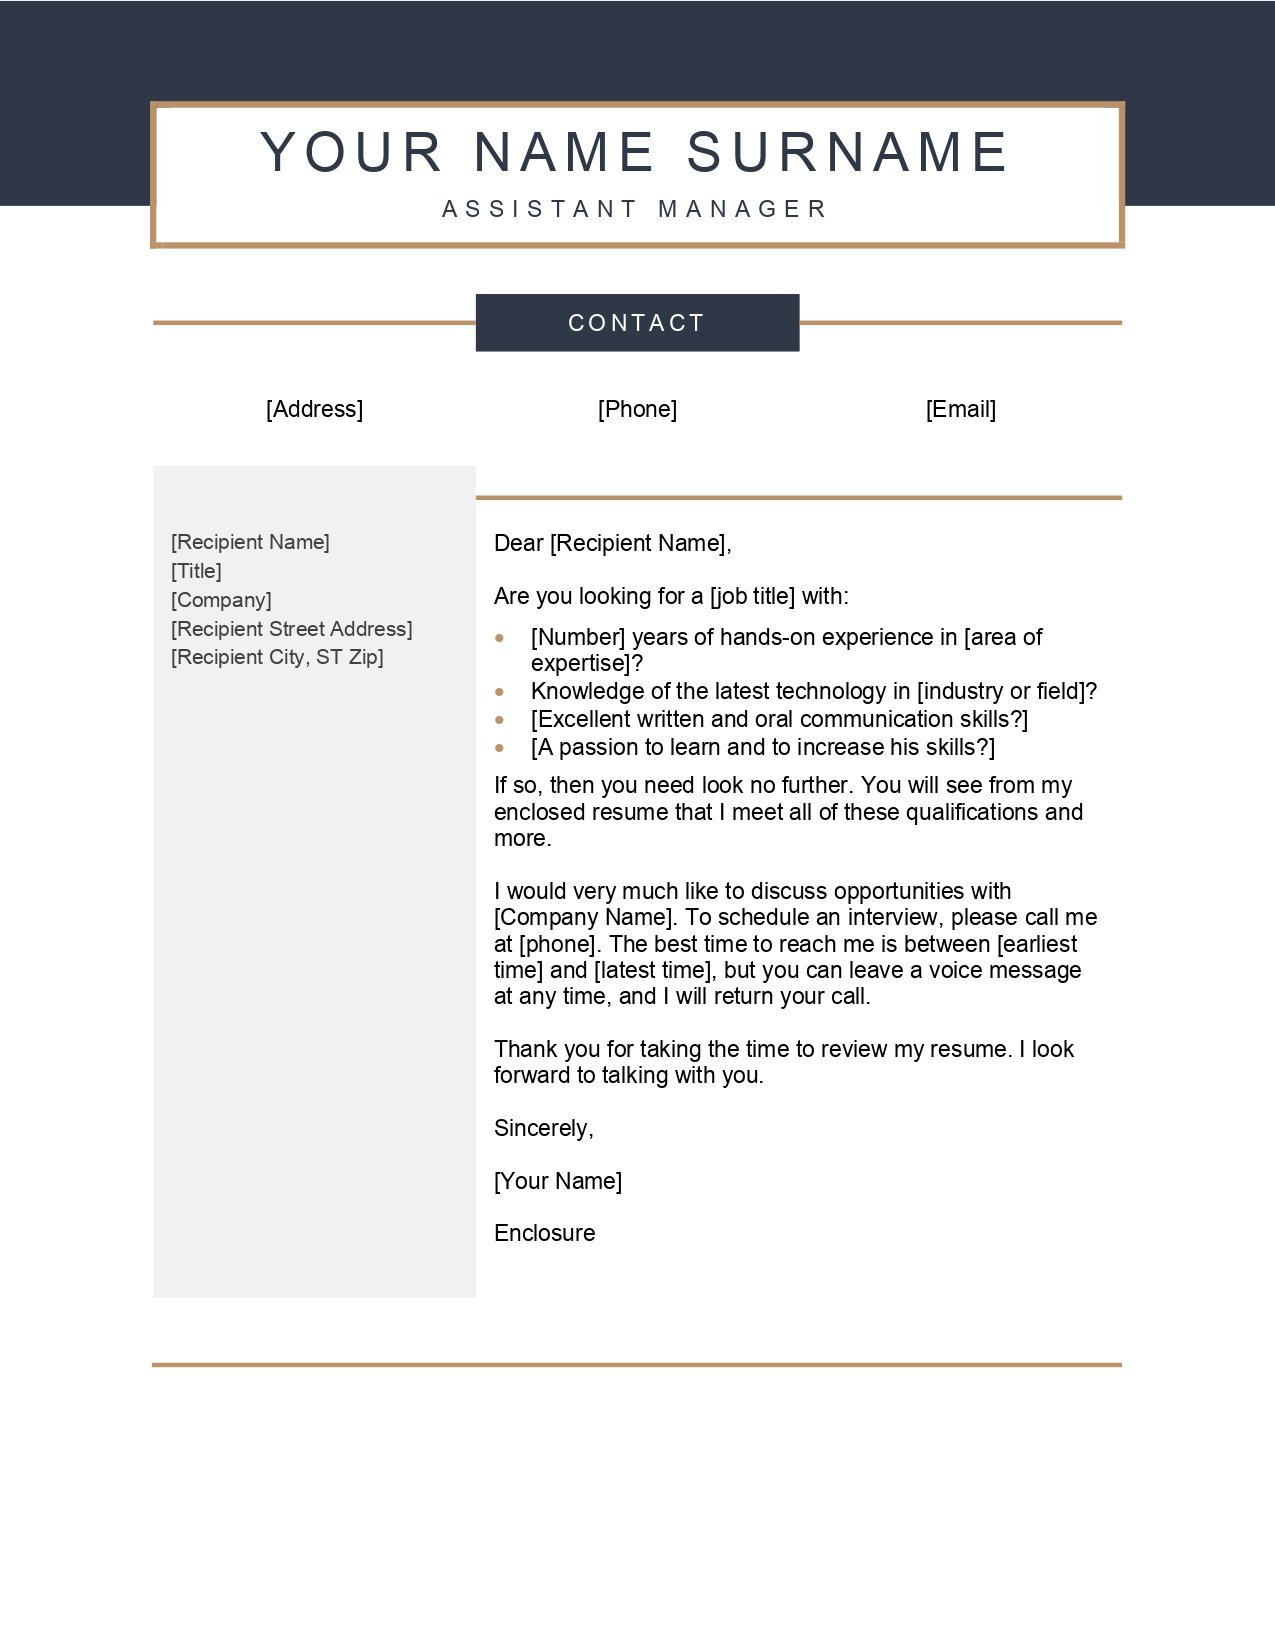 minimalist cover letter template